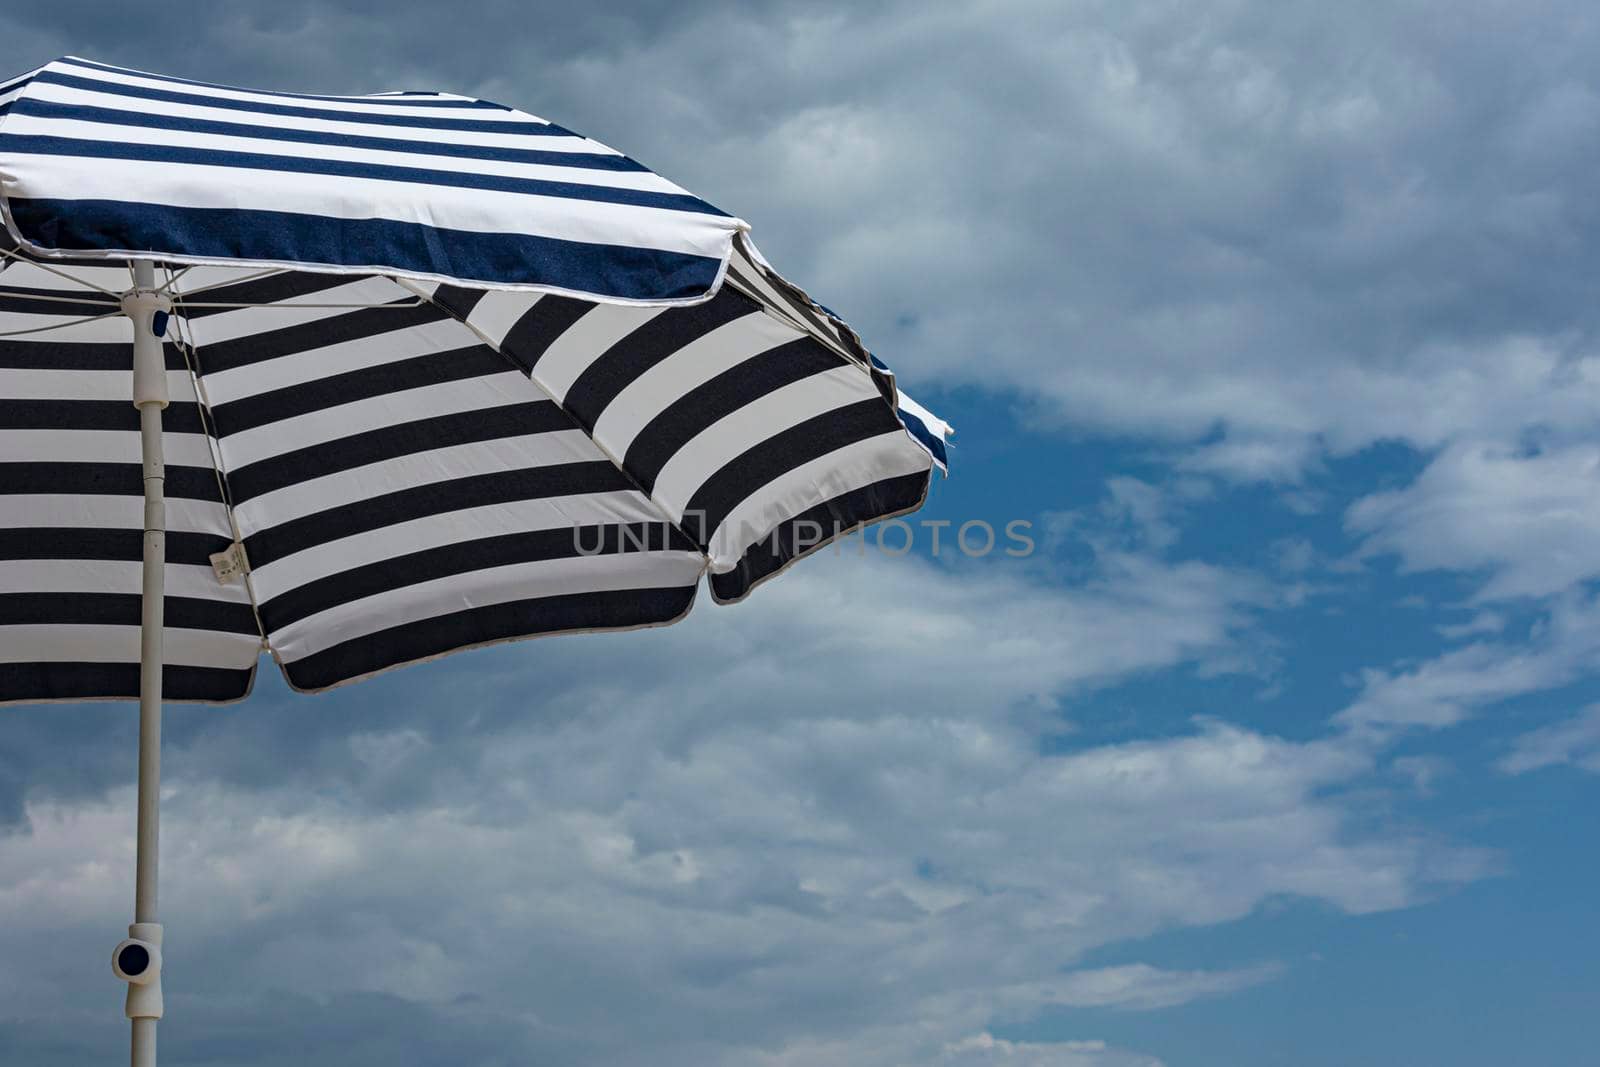 Beach umbrella from the sun on the background of blue sky with cirrus clouds by Grommik